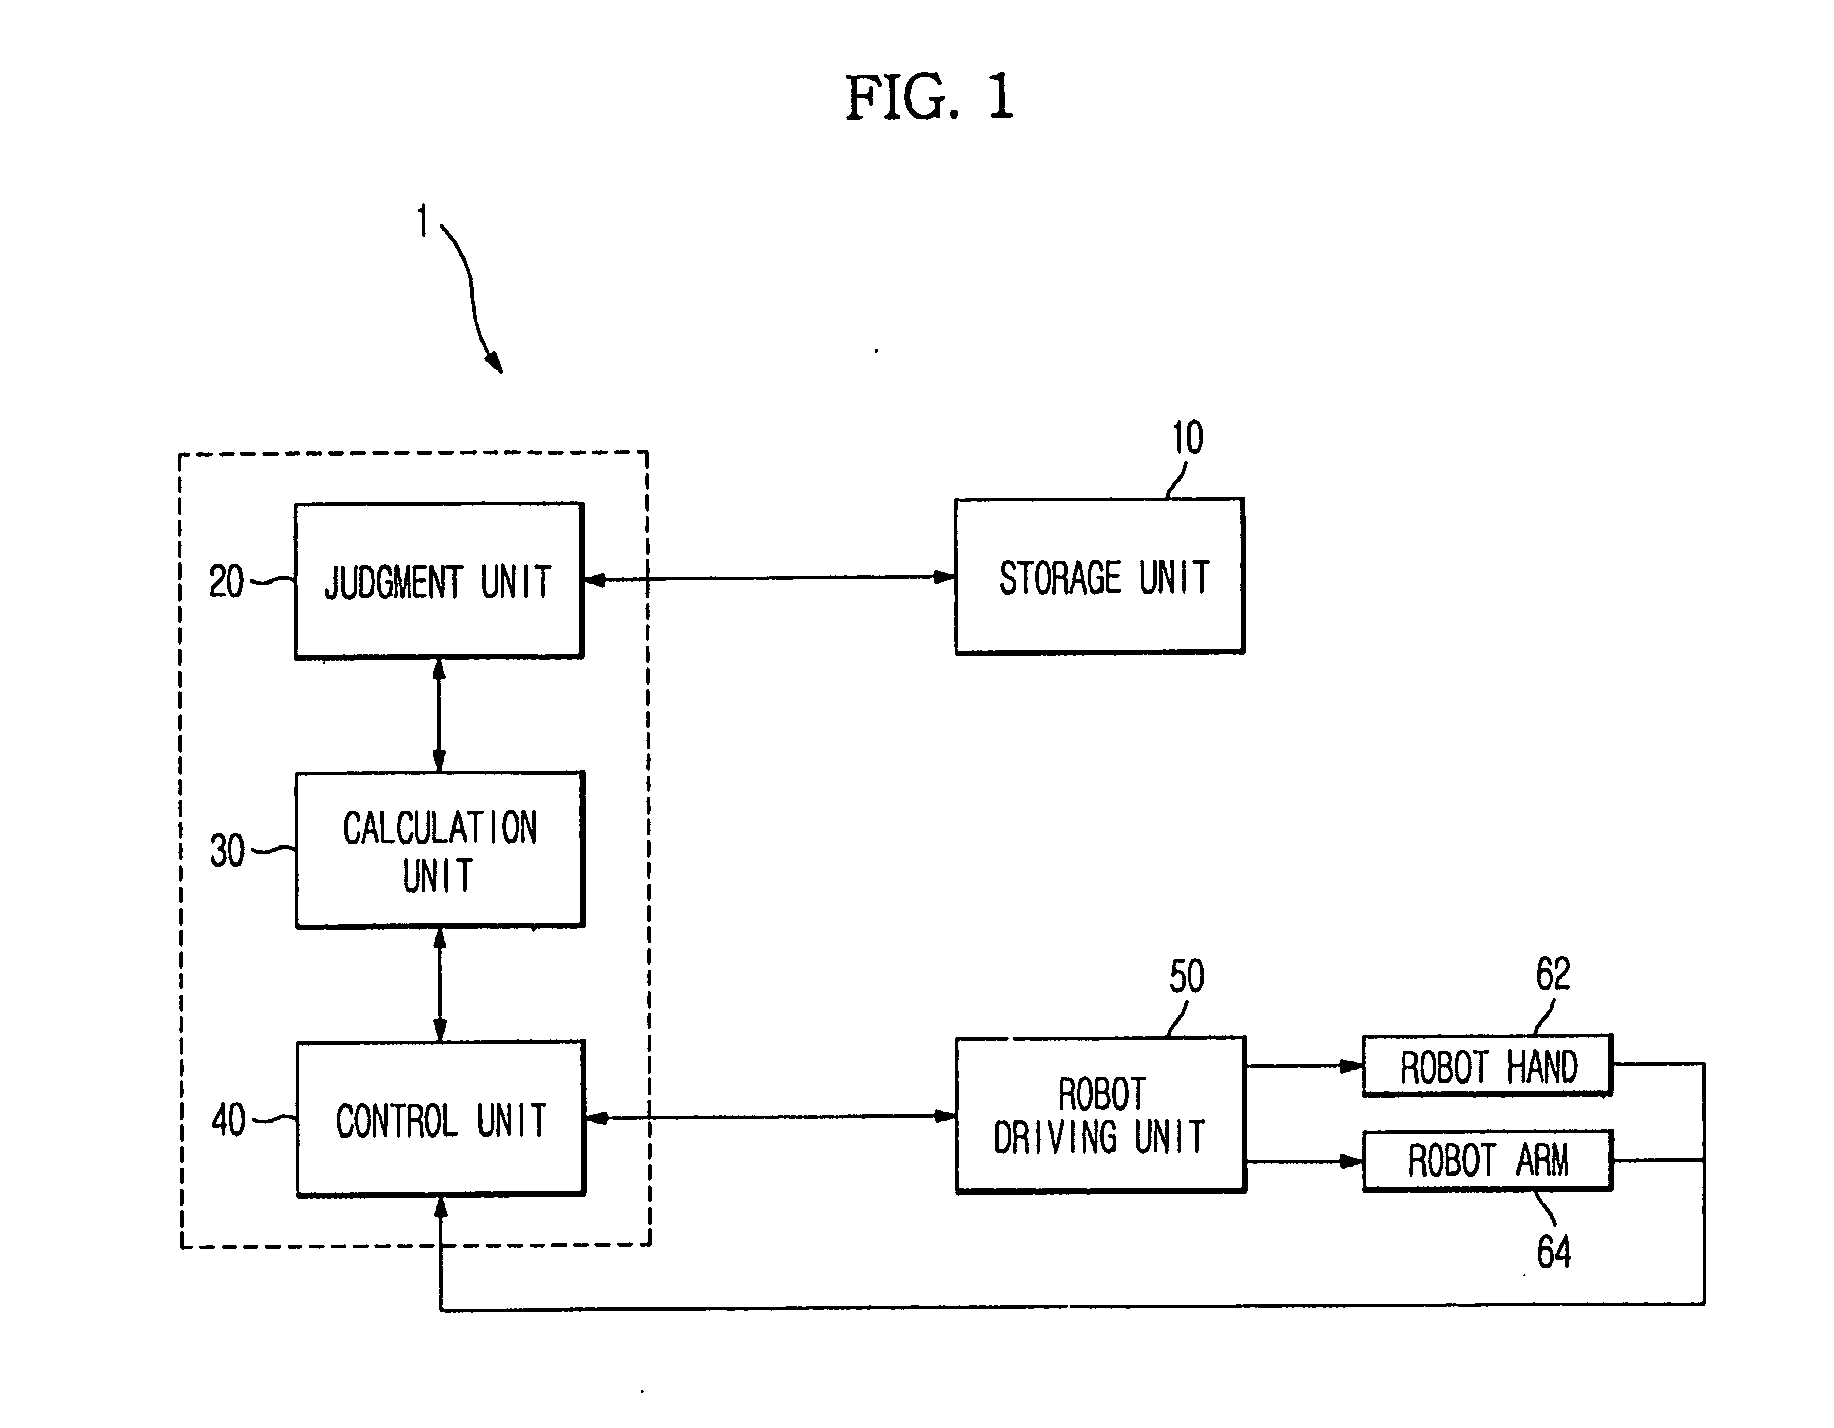 Path planning apparatus and method of Robot